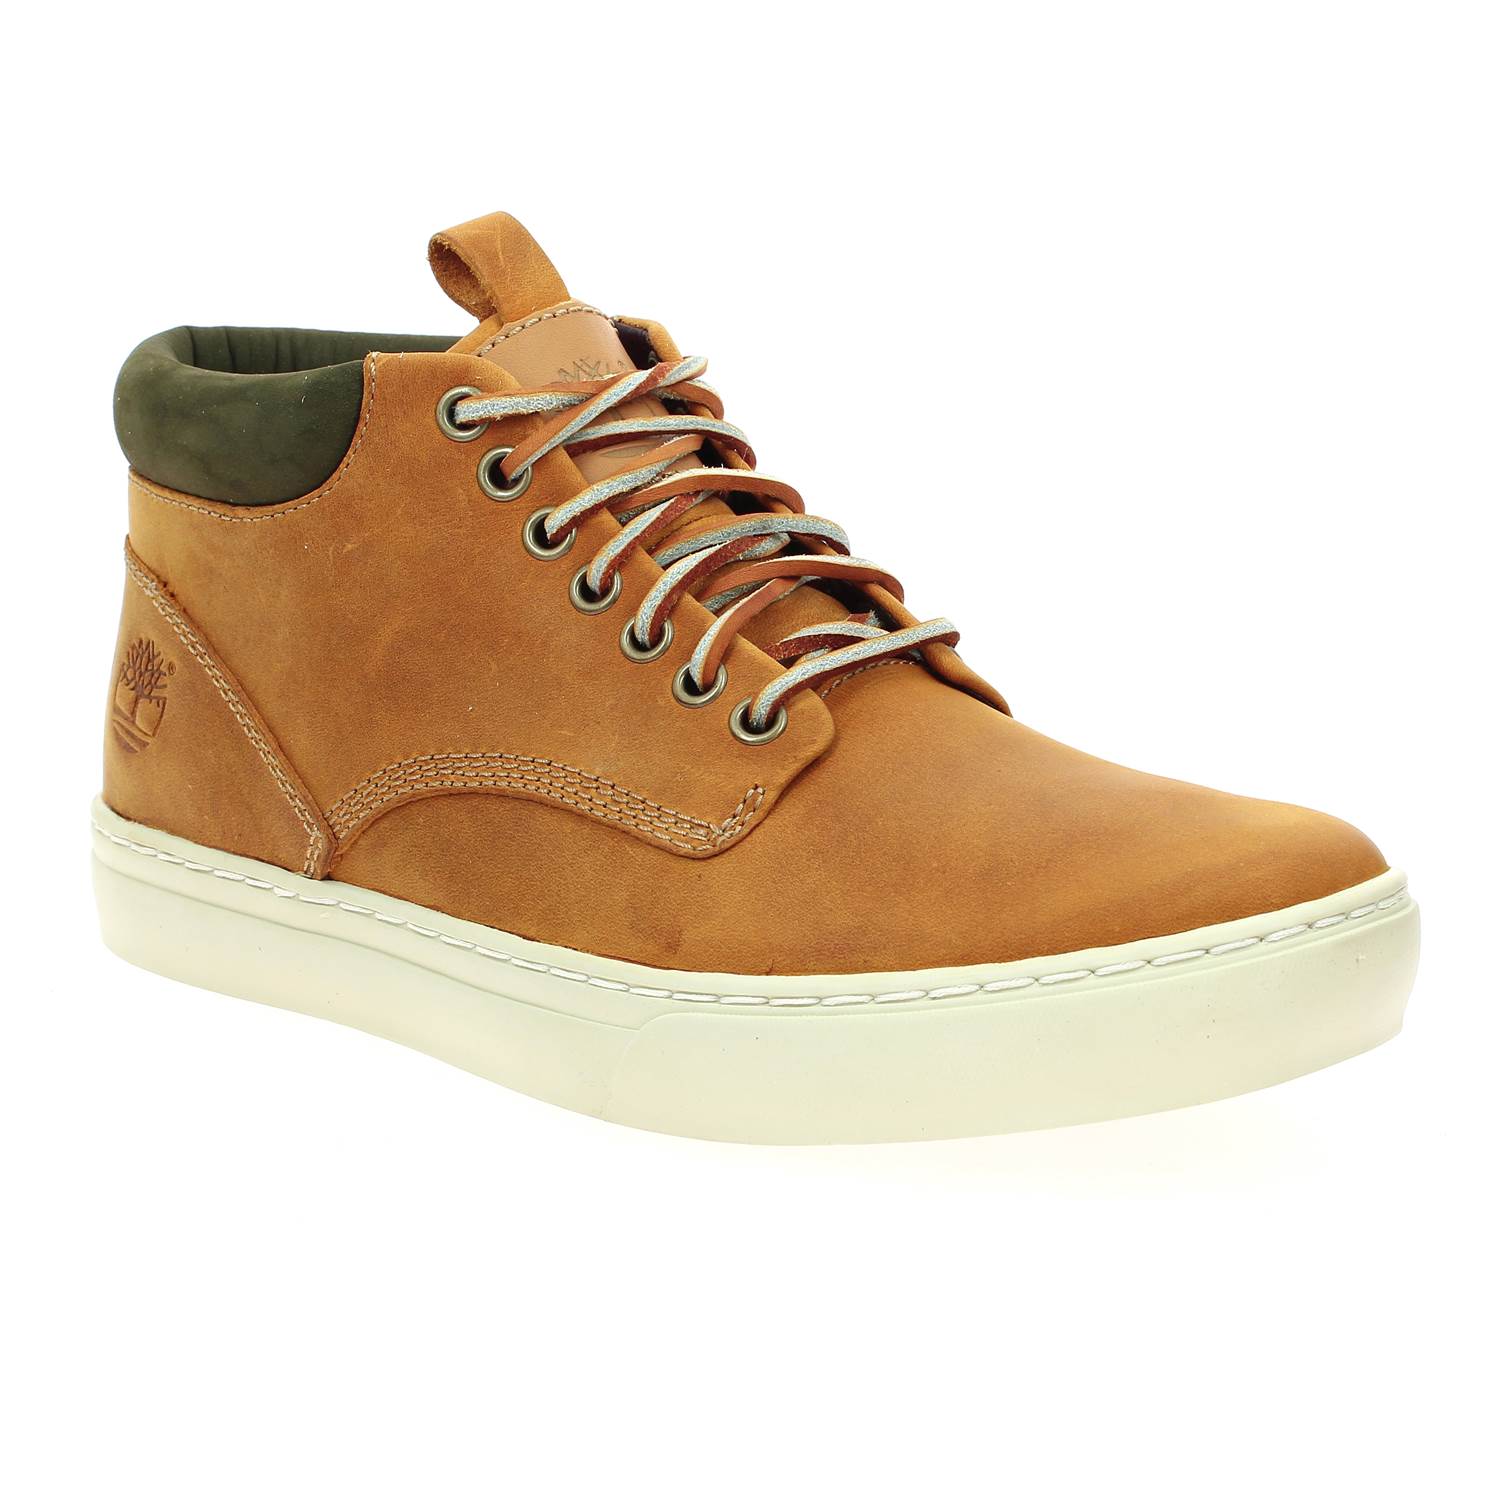 01 - CUPSOLE - TIMBERLAND - Boots et bottines - Cuir